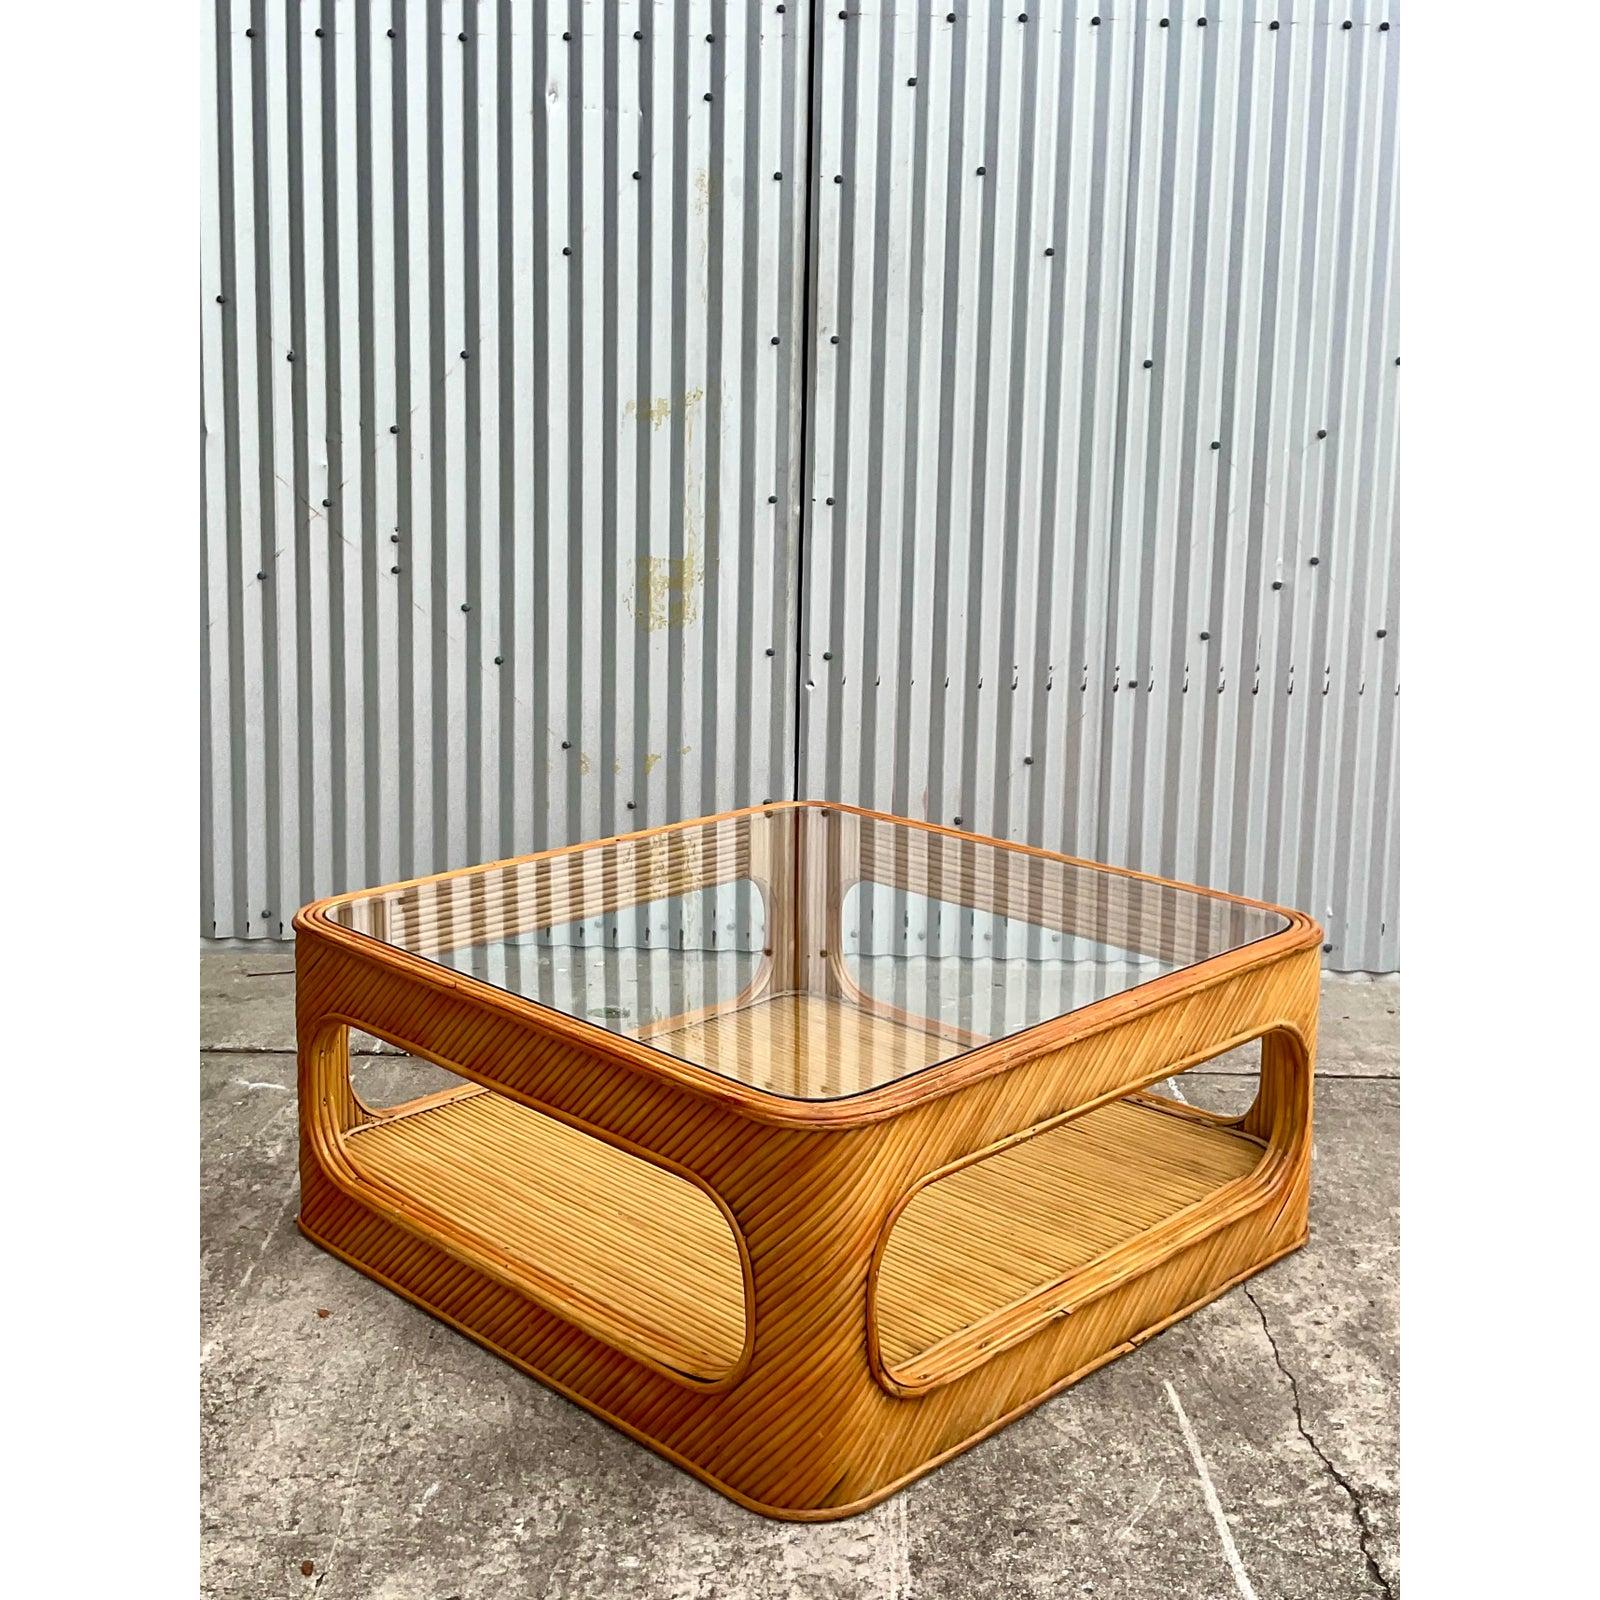 Fantastic vintage split bamboo coffee table. Chic cutout design and inset glass top. Acquired from a Palm Beach estate.